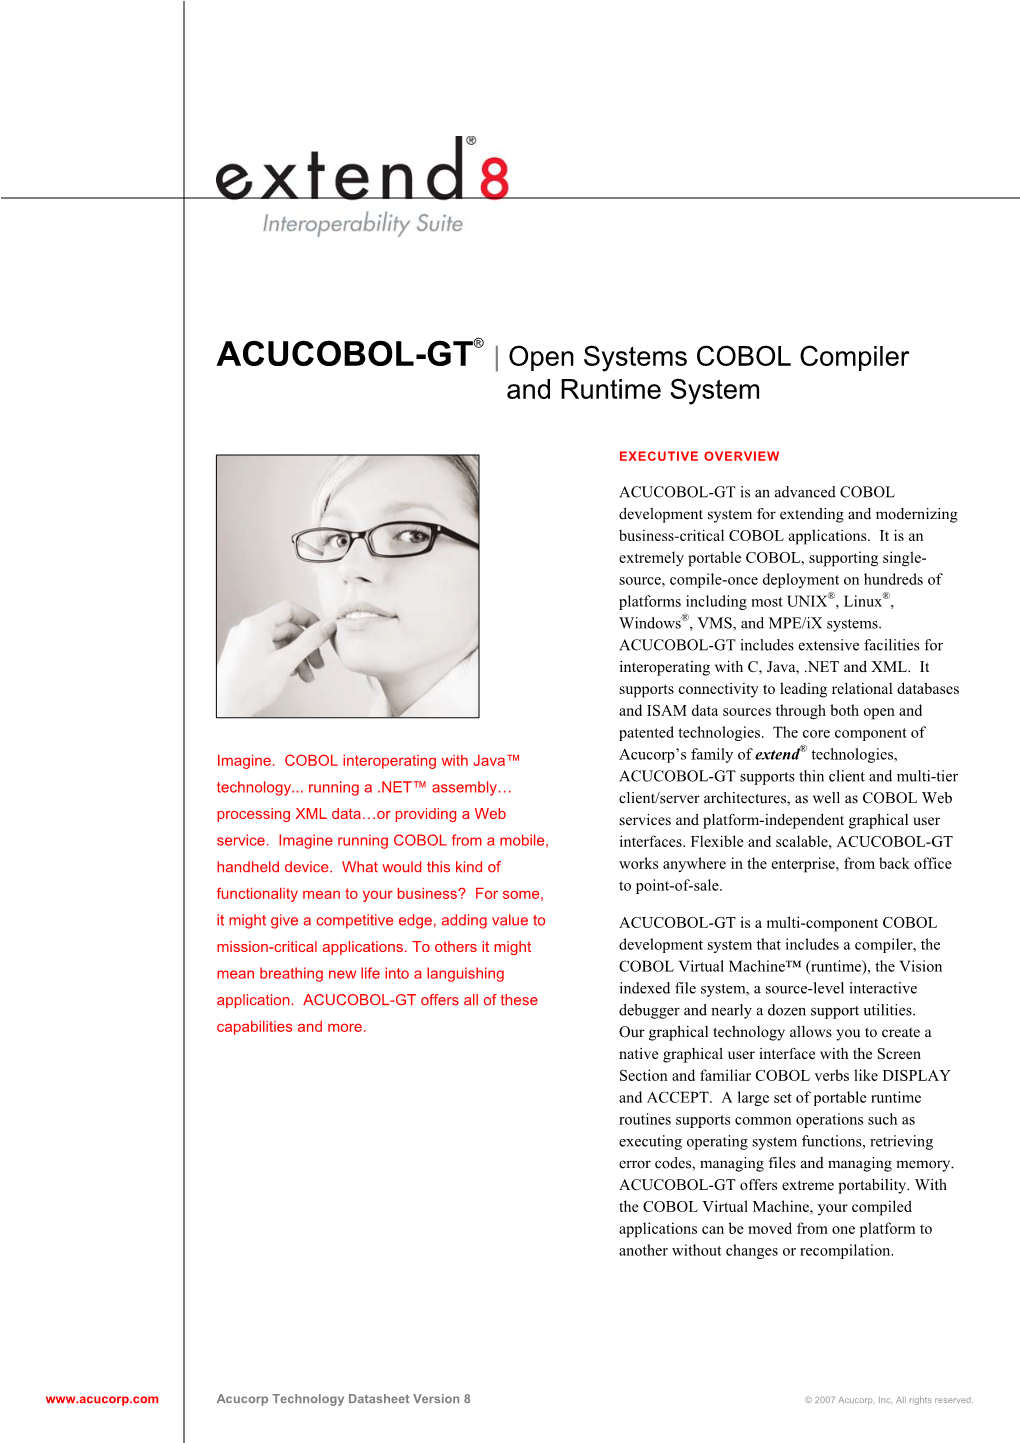 ACUCOBOL-GT | Open Systems COBOL Compiler and Runtime System